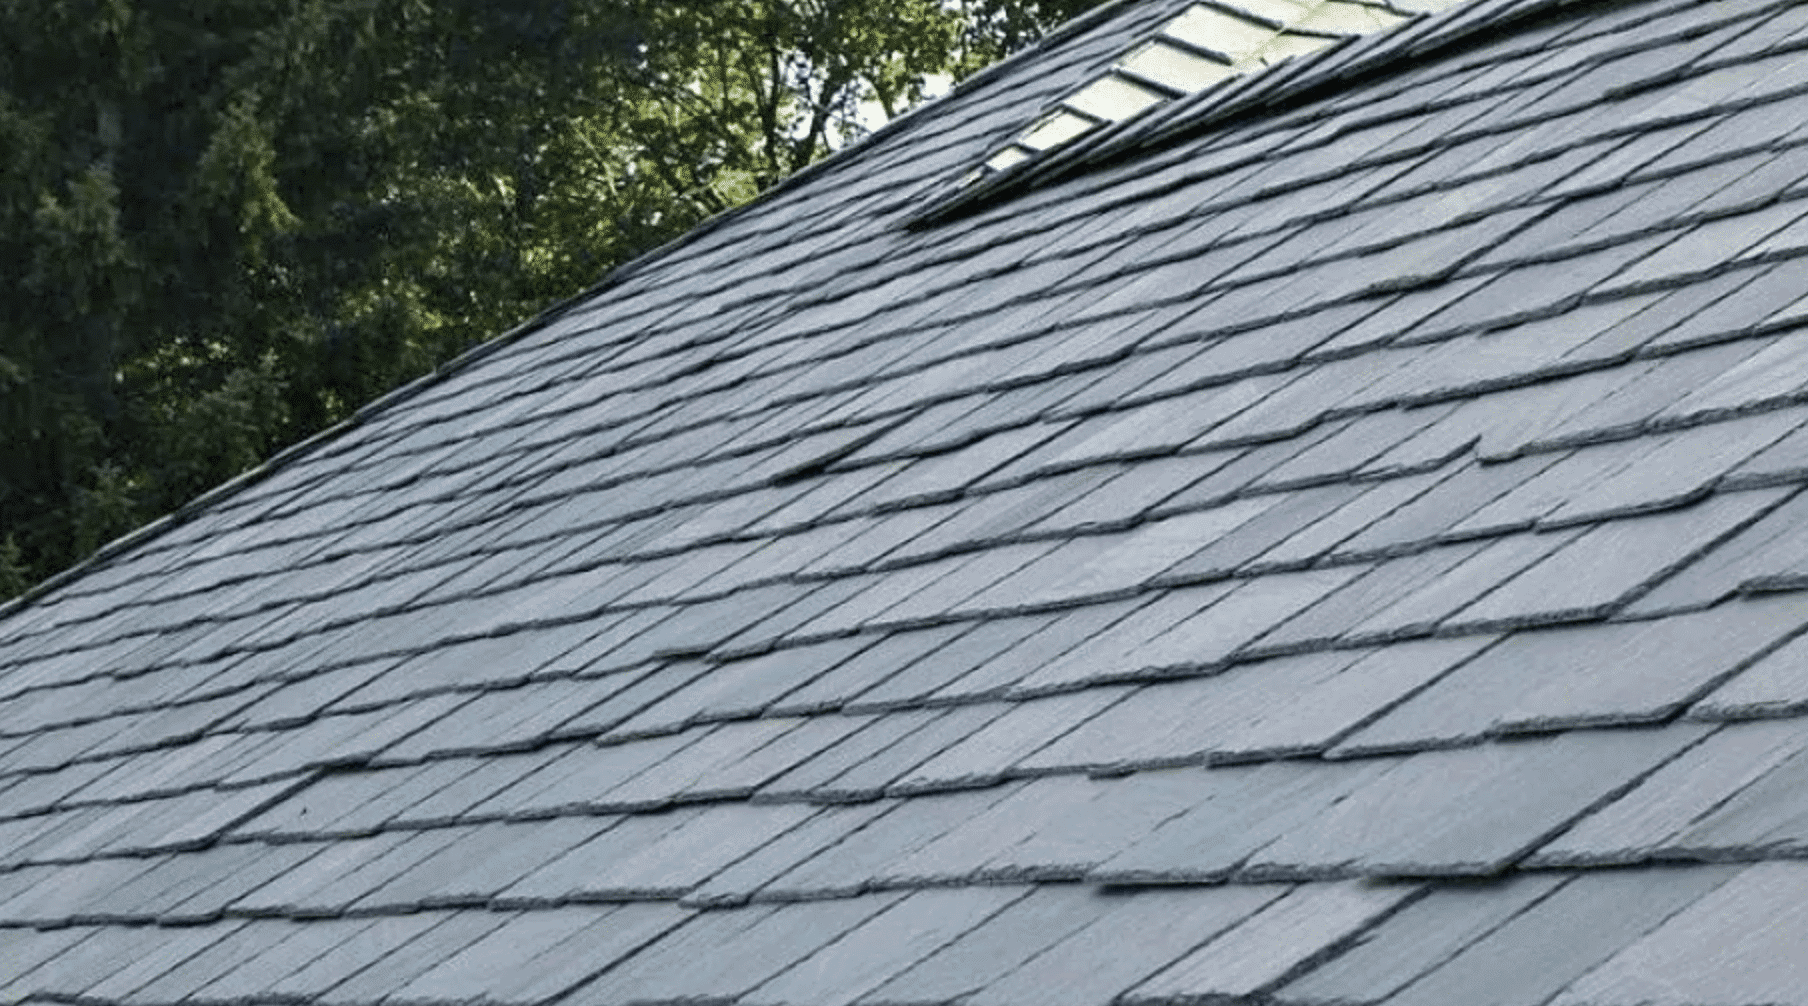 How to Prolong Your Roof’s Lifespan